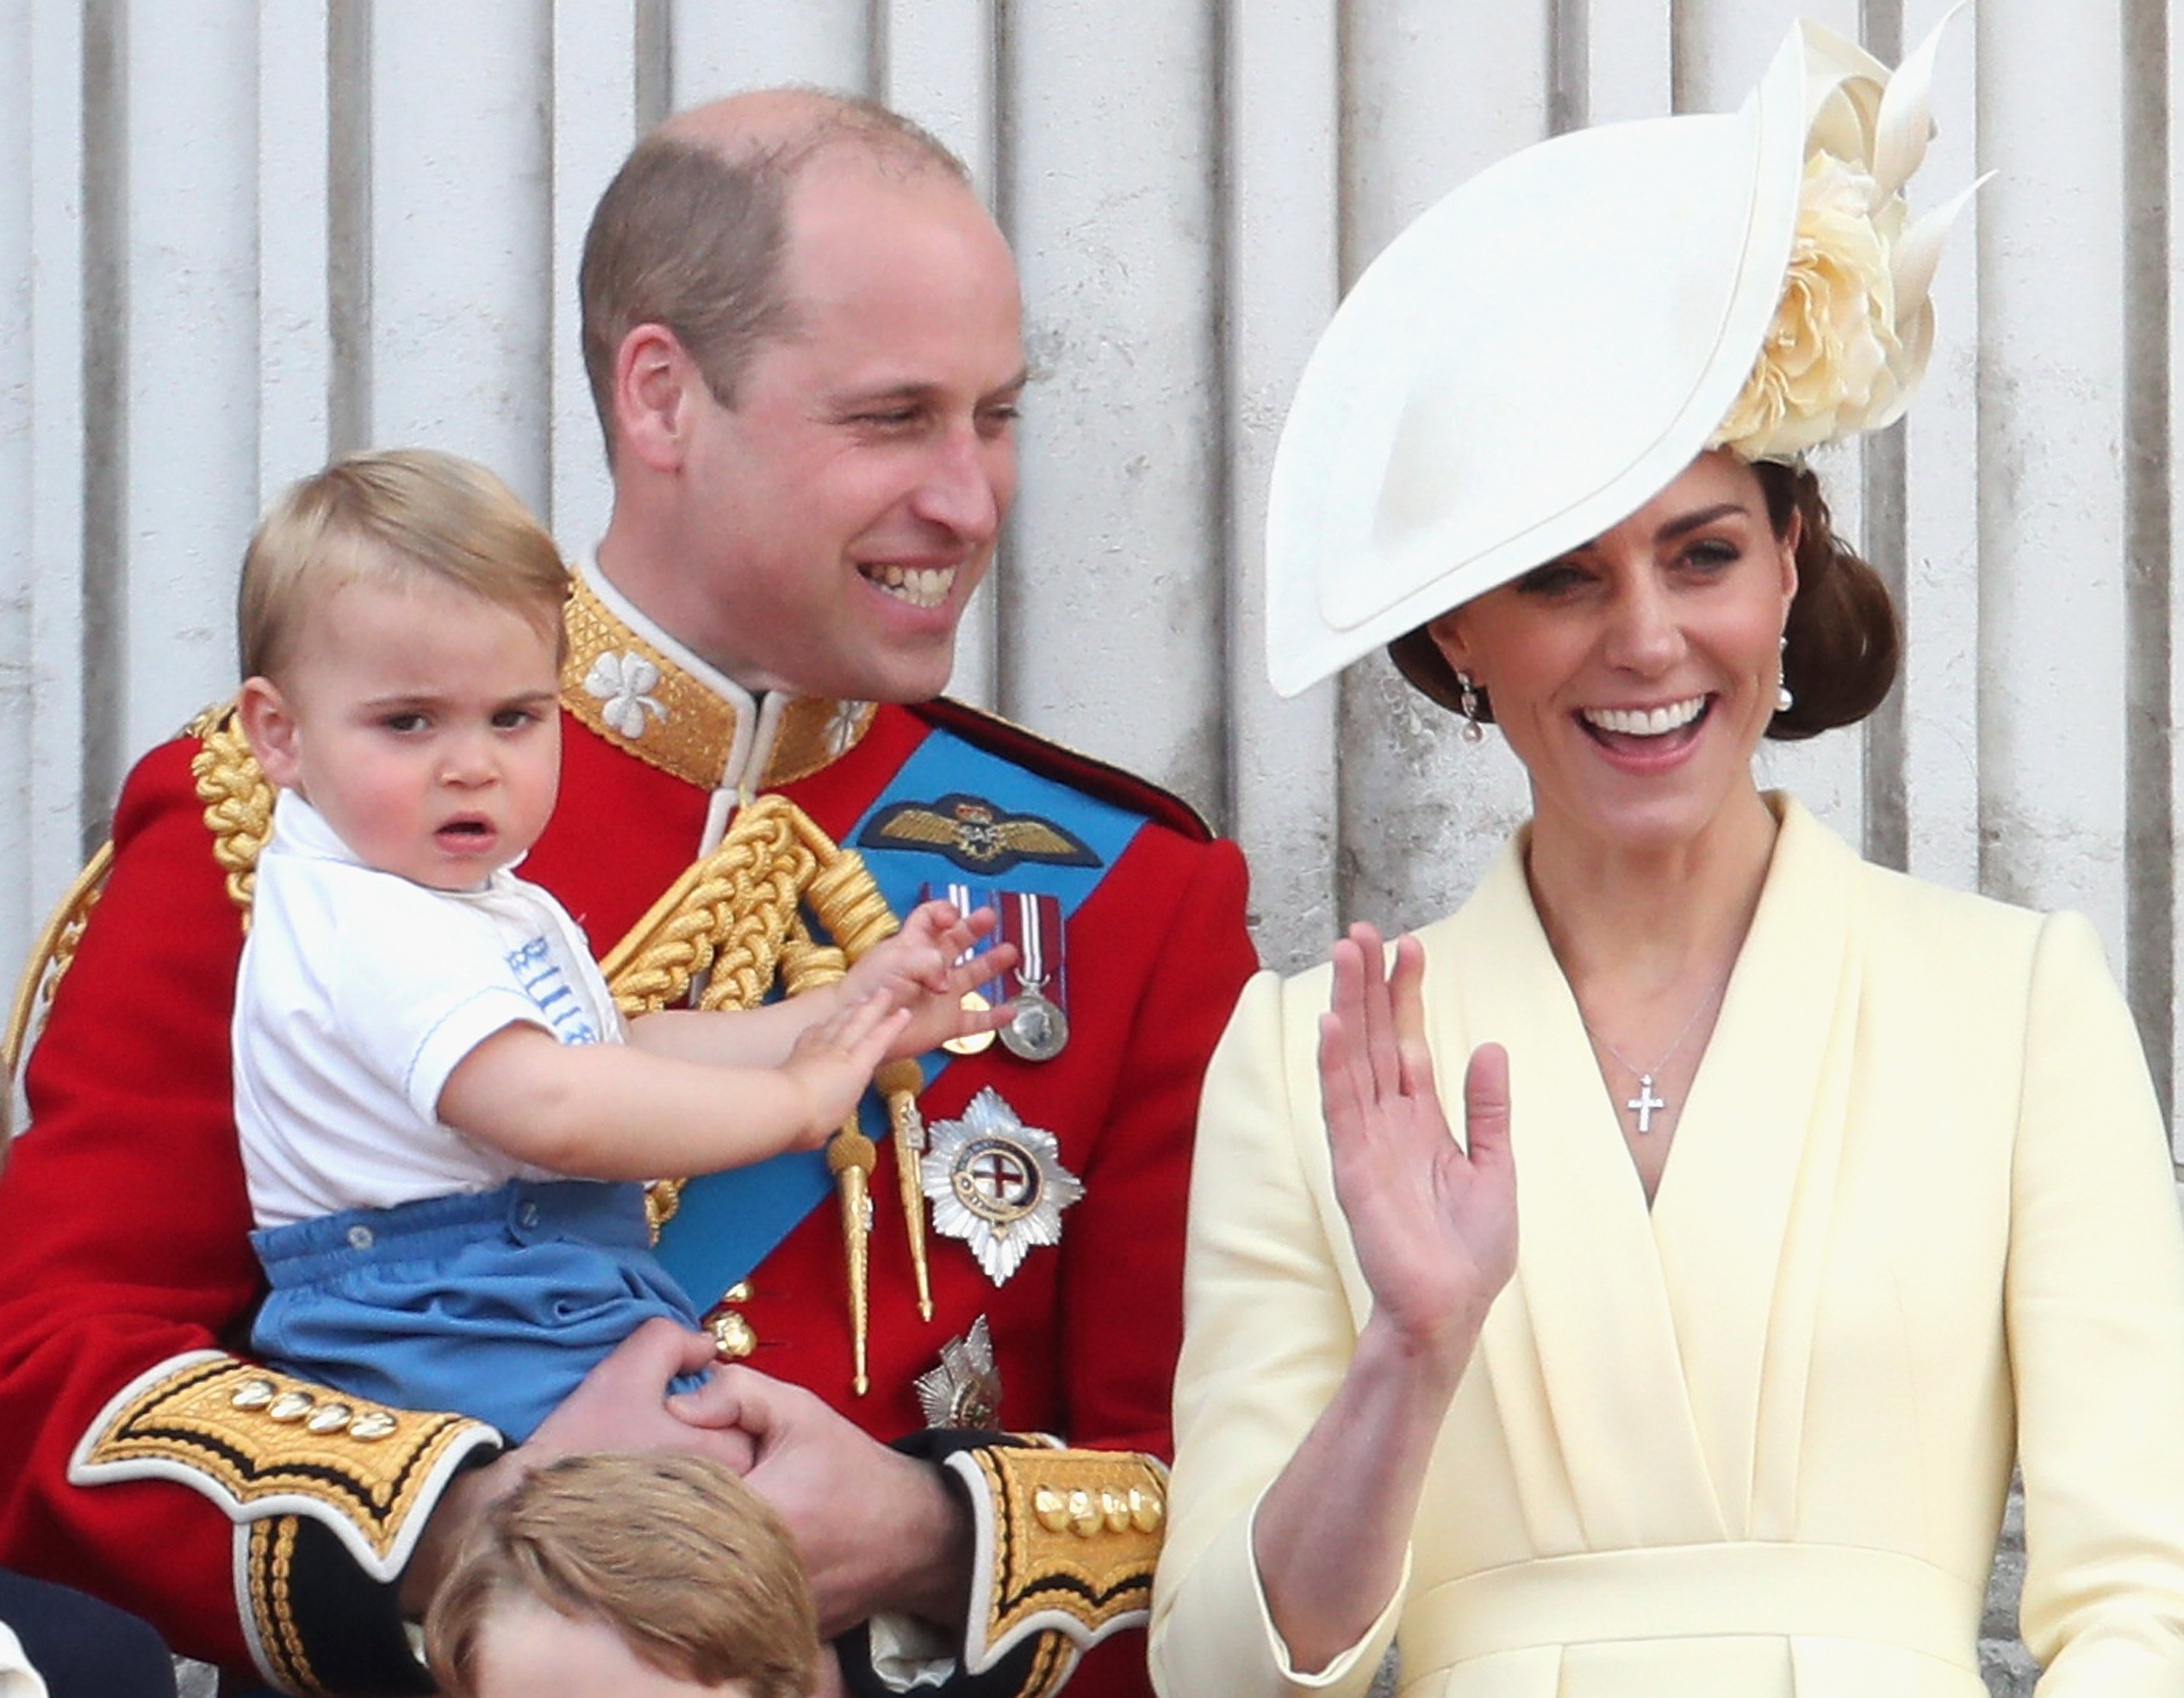 Prince William and Kate Middleton are pictured with Prince Louis during the Trooping The Colour, on Queen Elizabeth's annual birthday parade, on June 8, 2019 in London, England. | Source: Getty Images